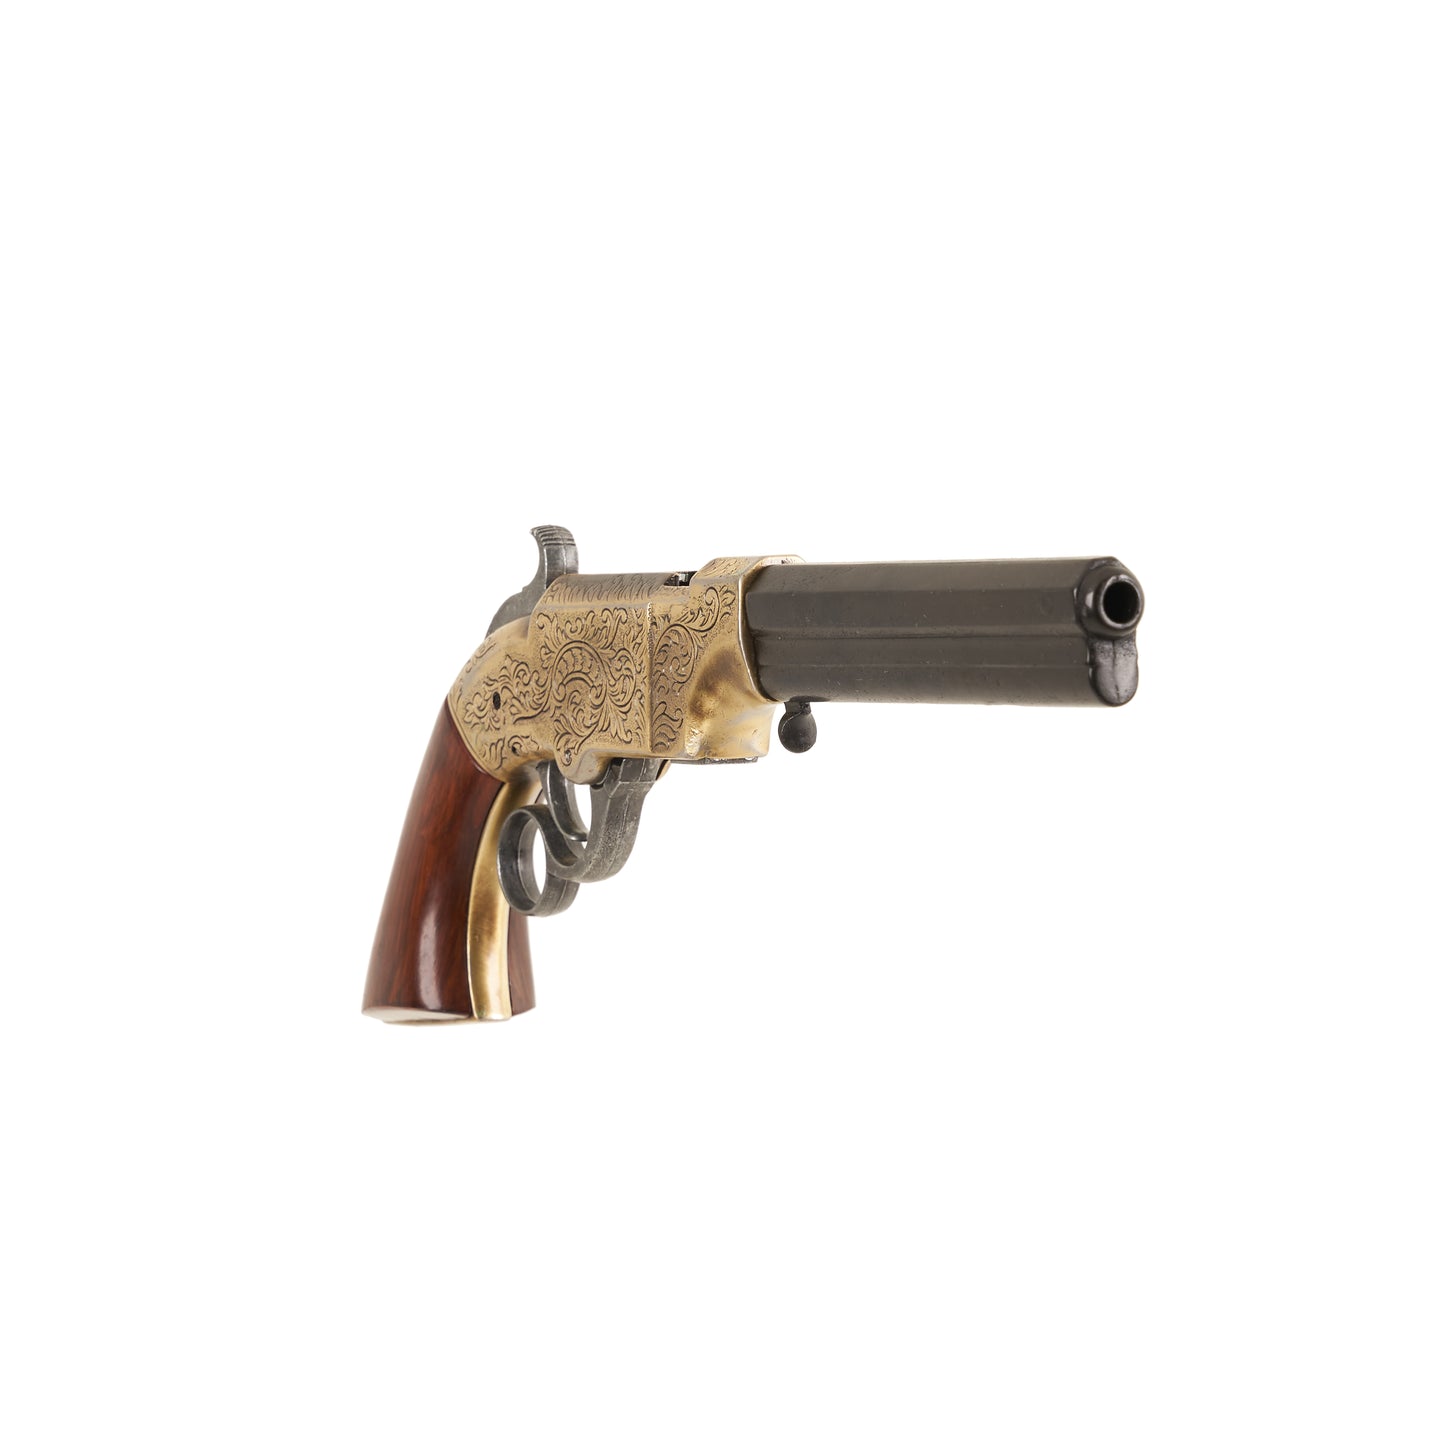 Front view of Brass Non-Firing Replica 1854 Volcanic Revolver with wood grip and black barrel.